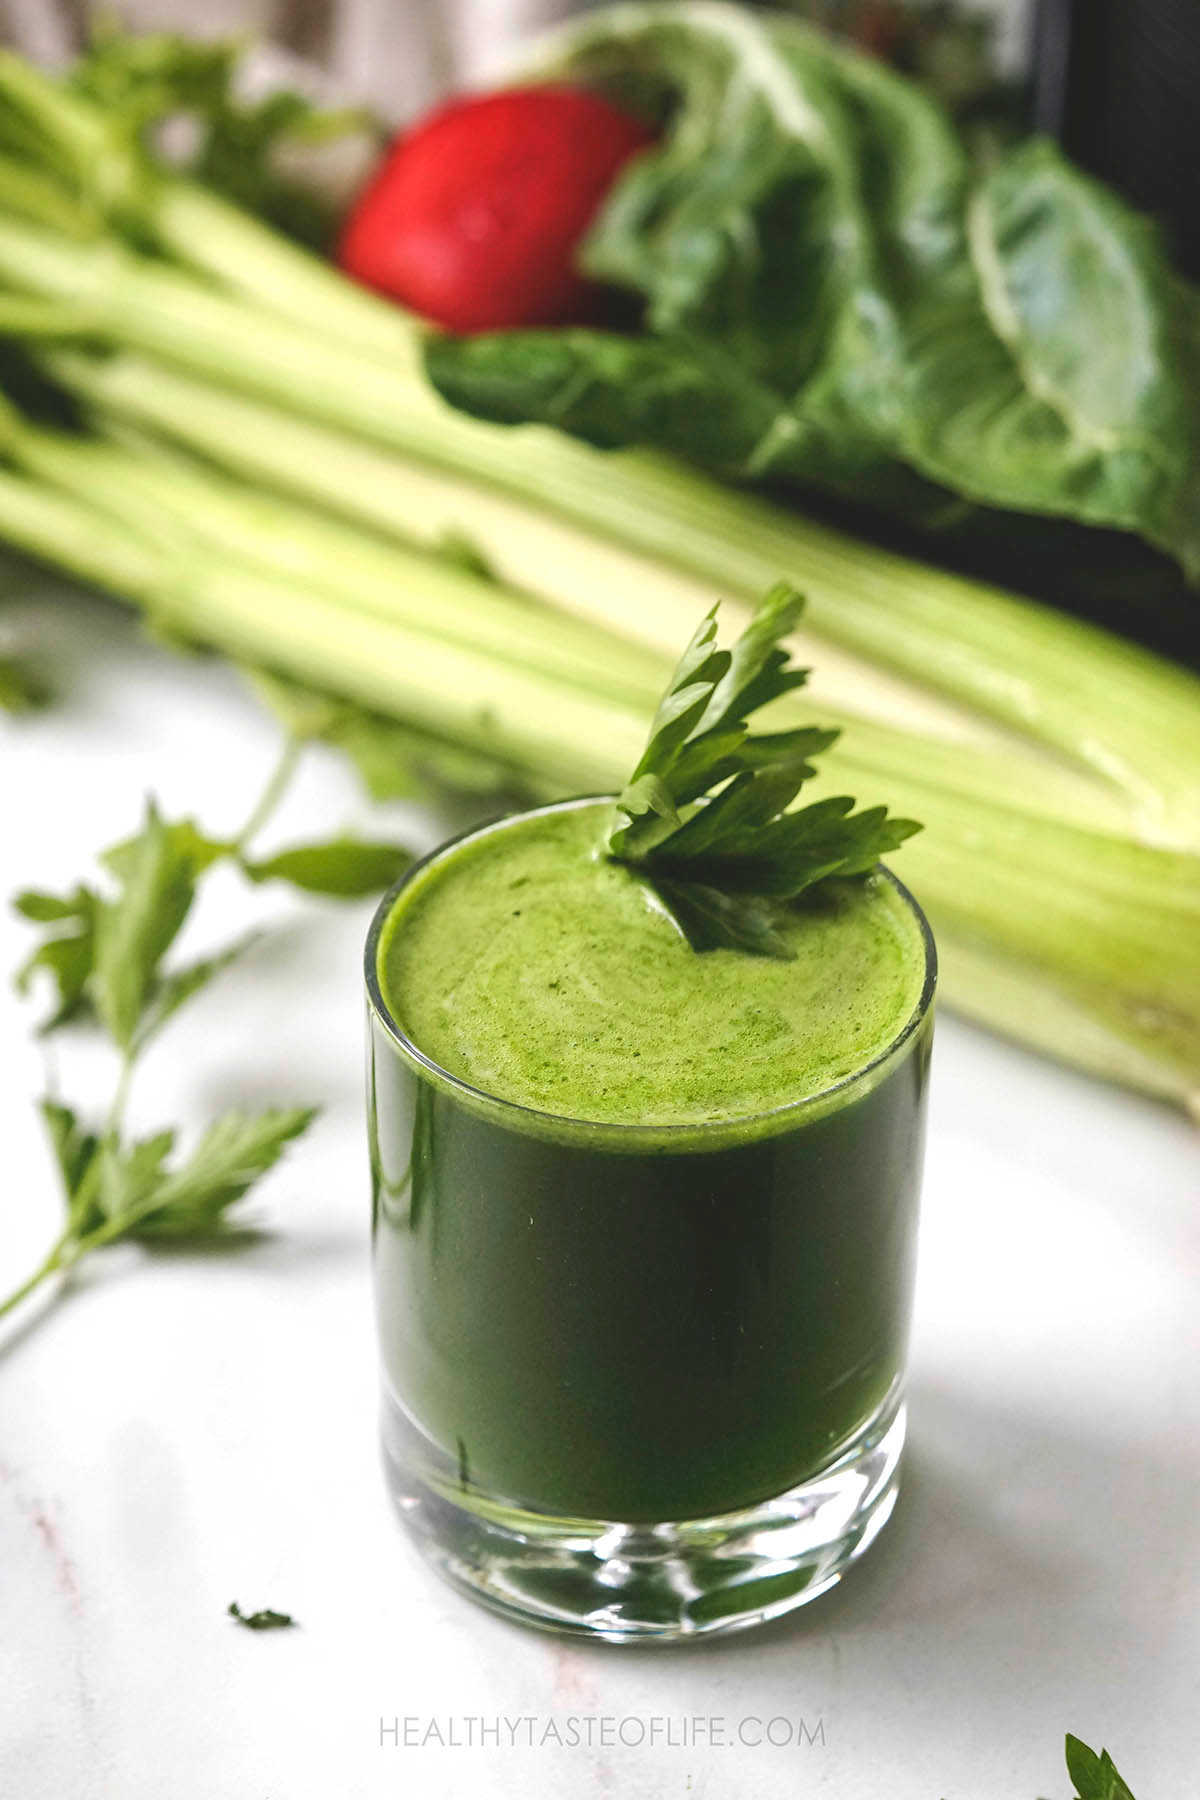 A glass filled with green anti-inflammatory juice and garnished with parsley.